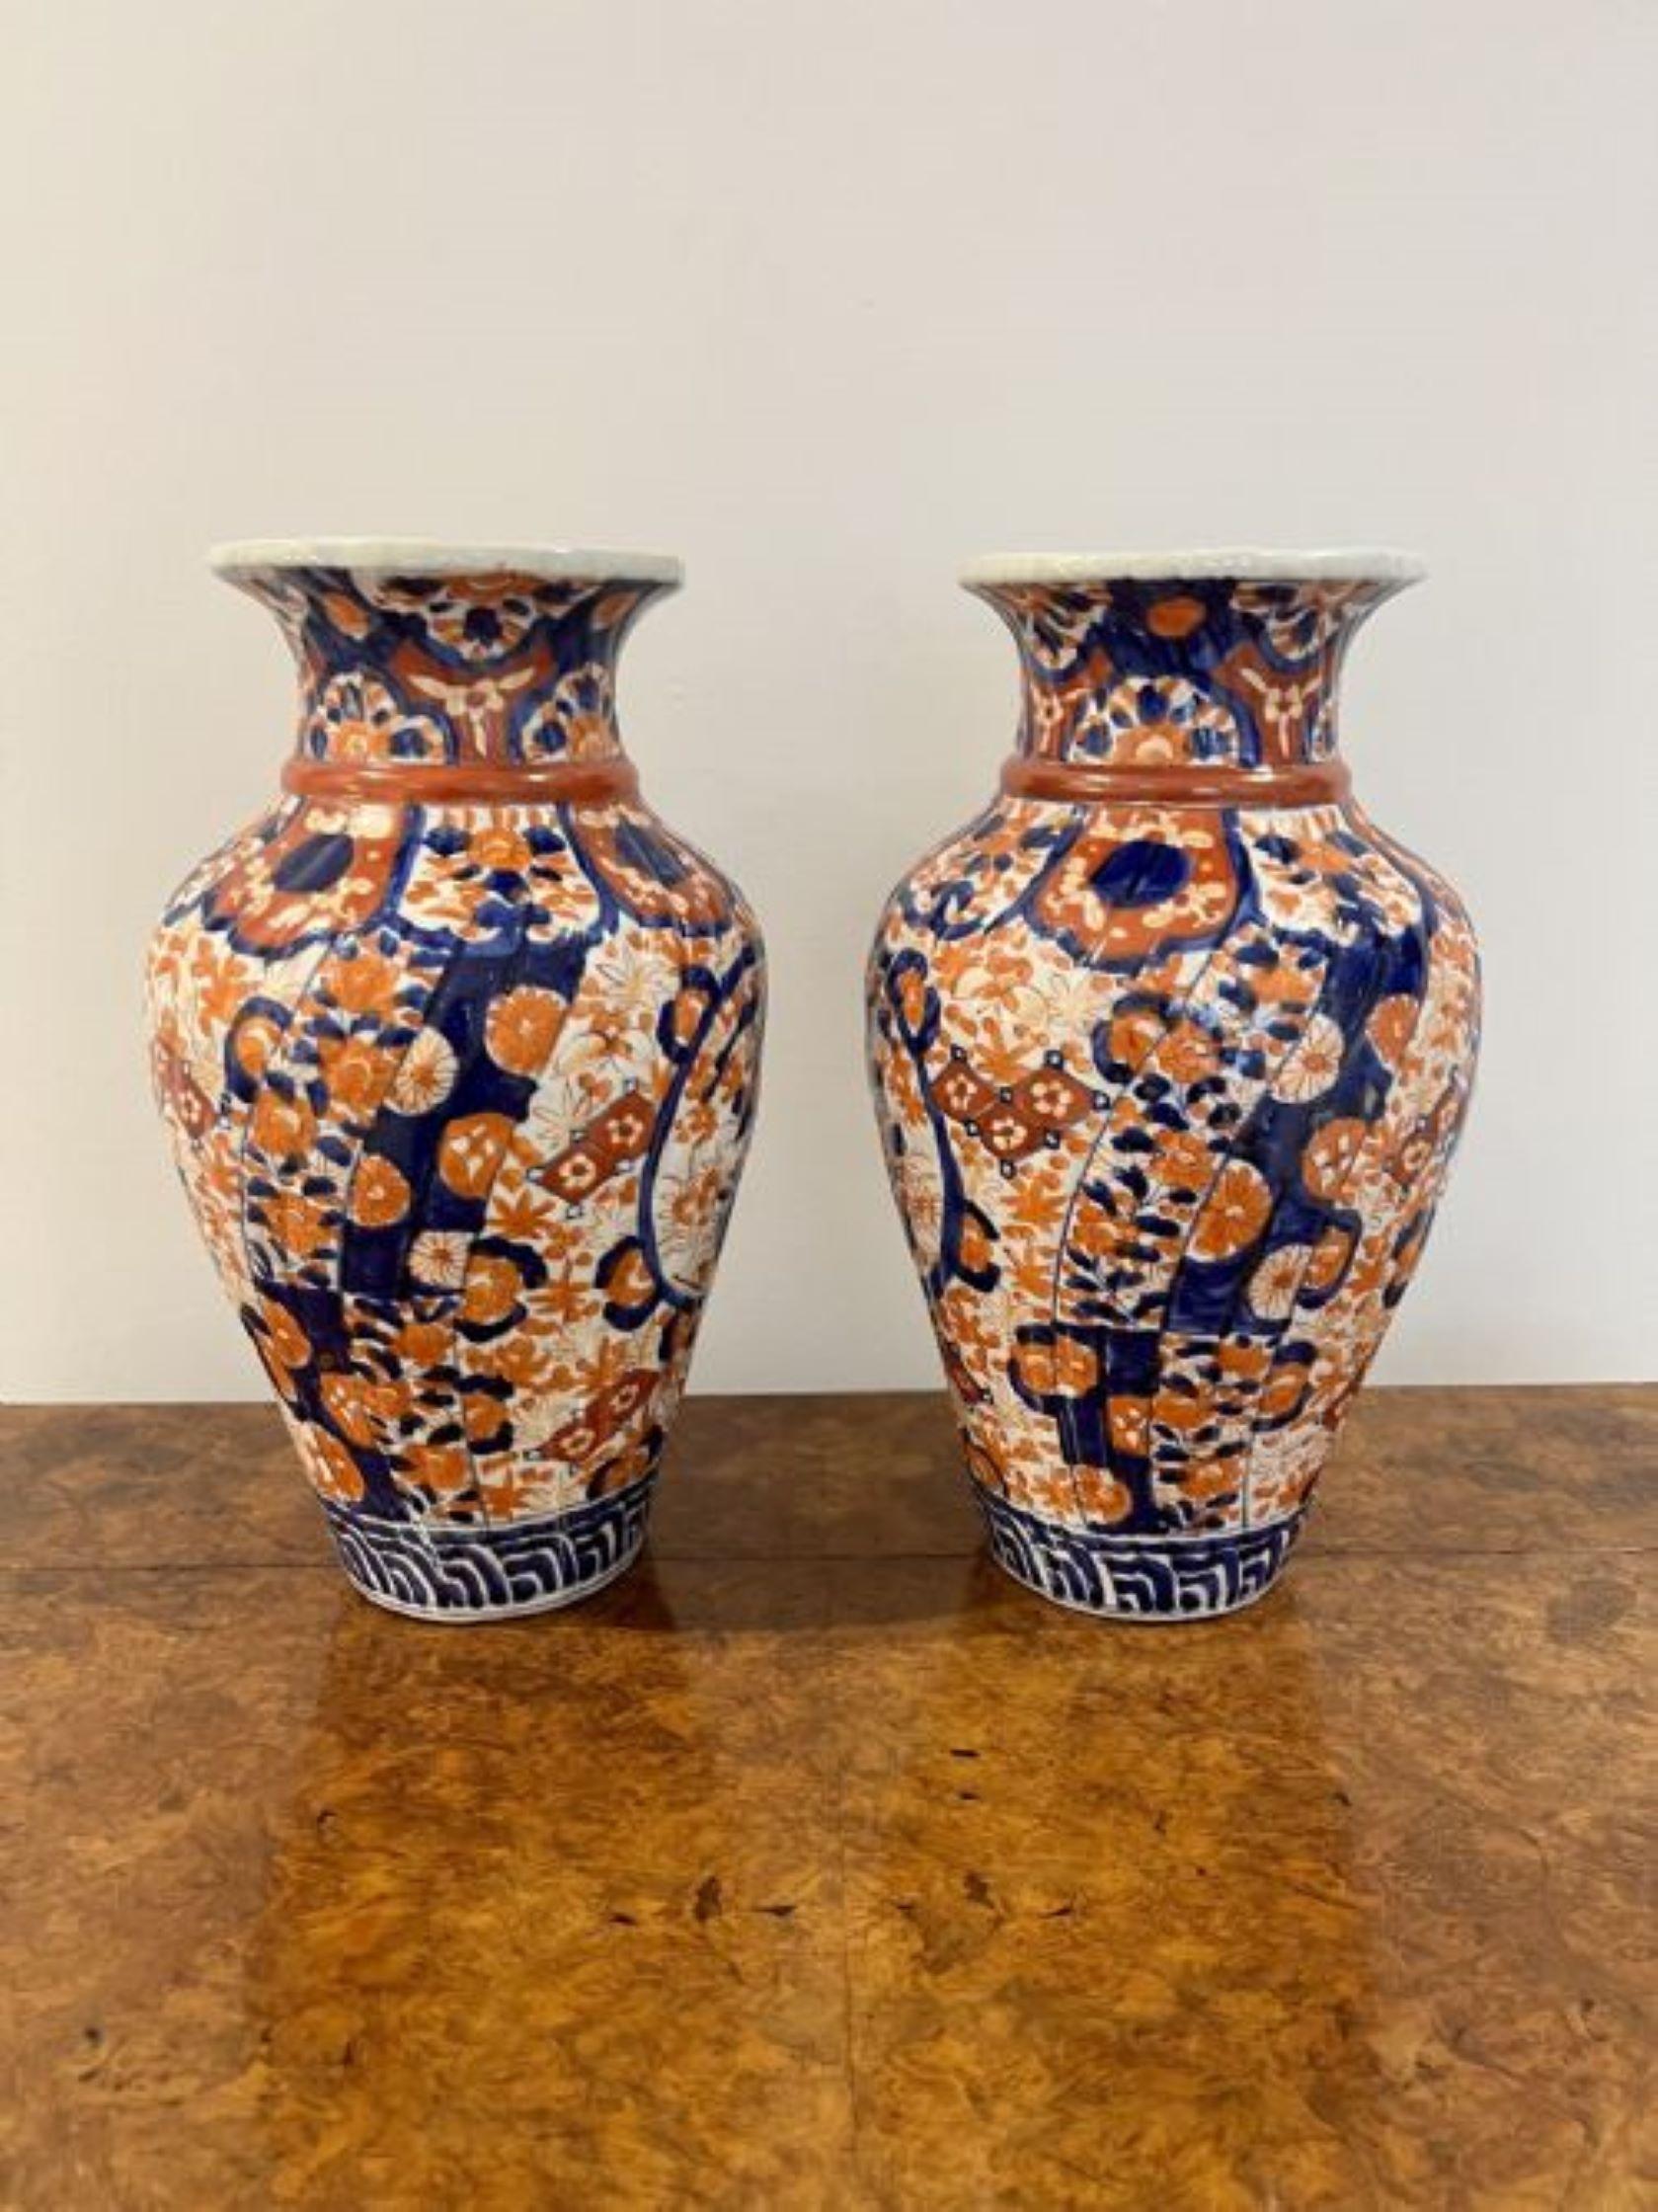 Fantastic quality pair of large antique Japanese Imari vases in wonderful hand painted red, blue and white colours decorated with a basket of flowers to the front and back surrounded by flowers and leaves. 